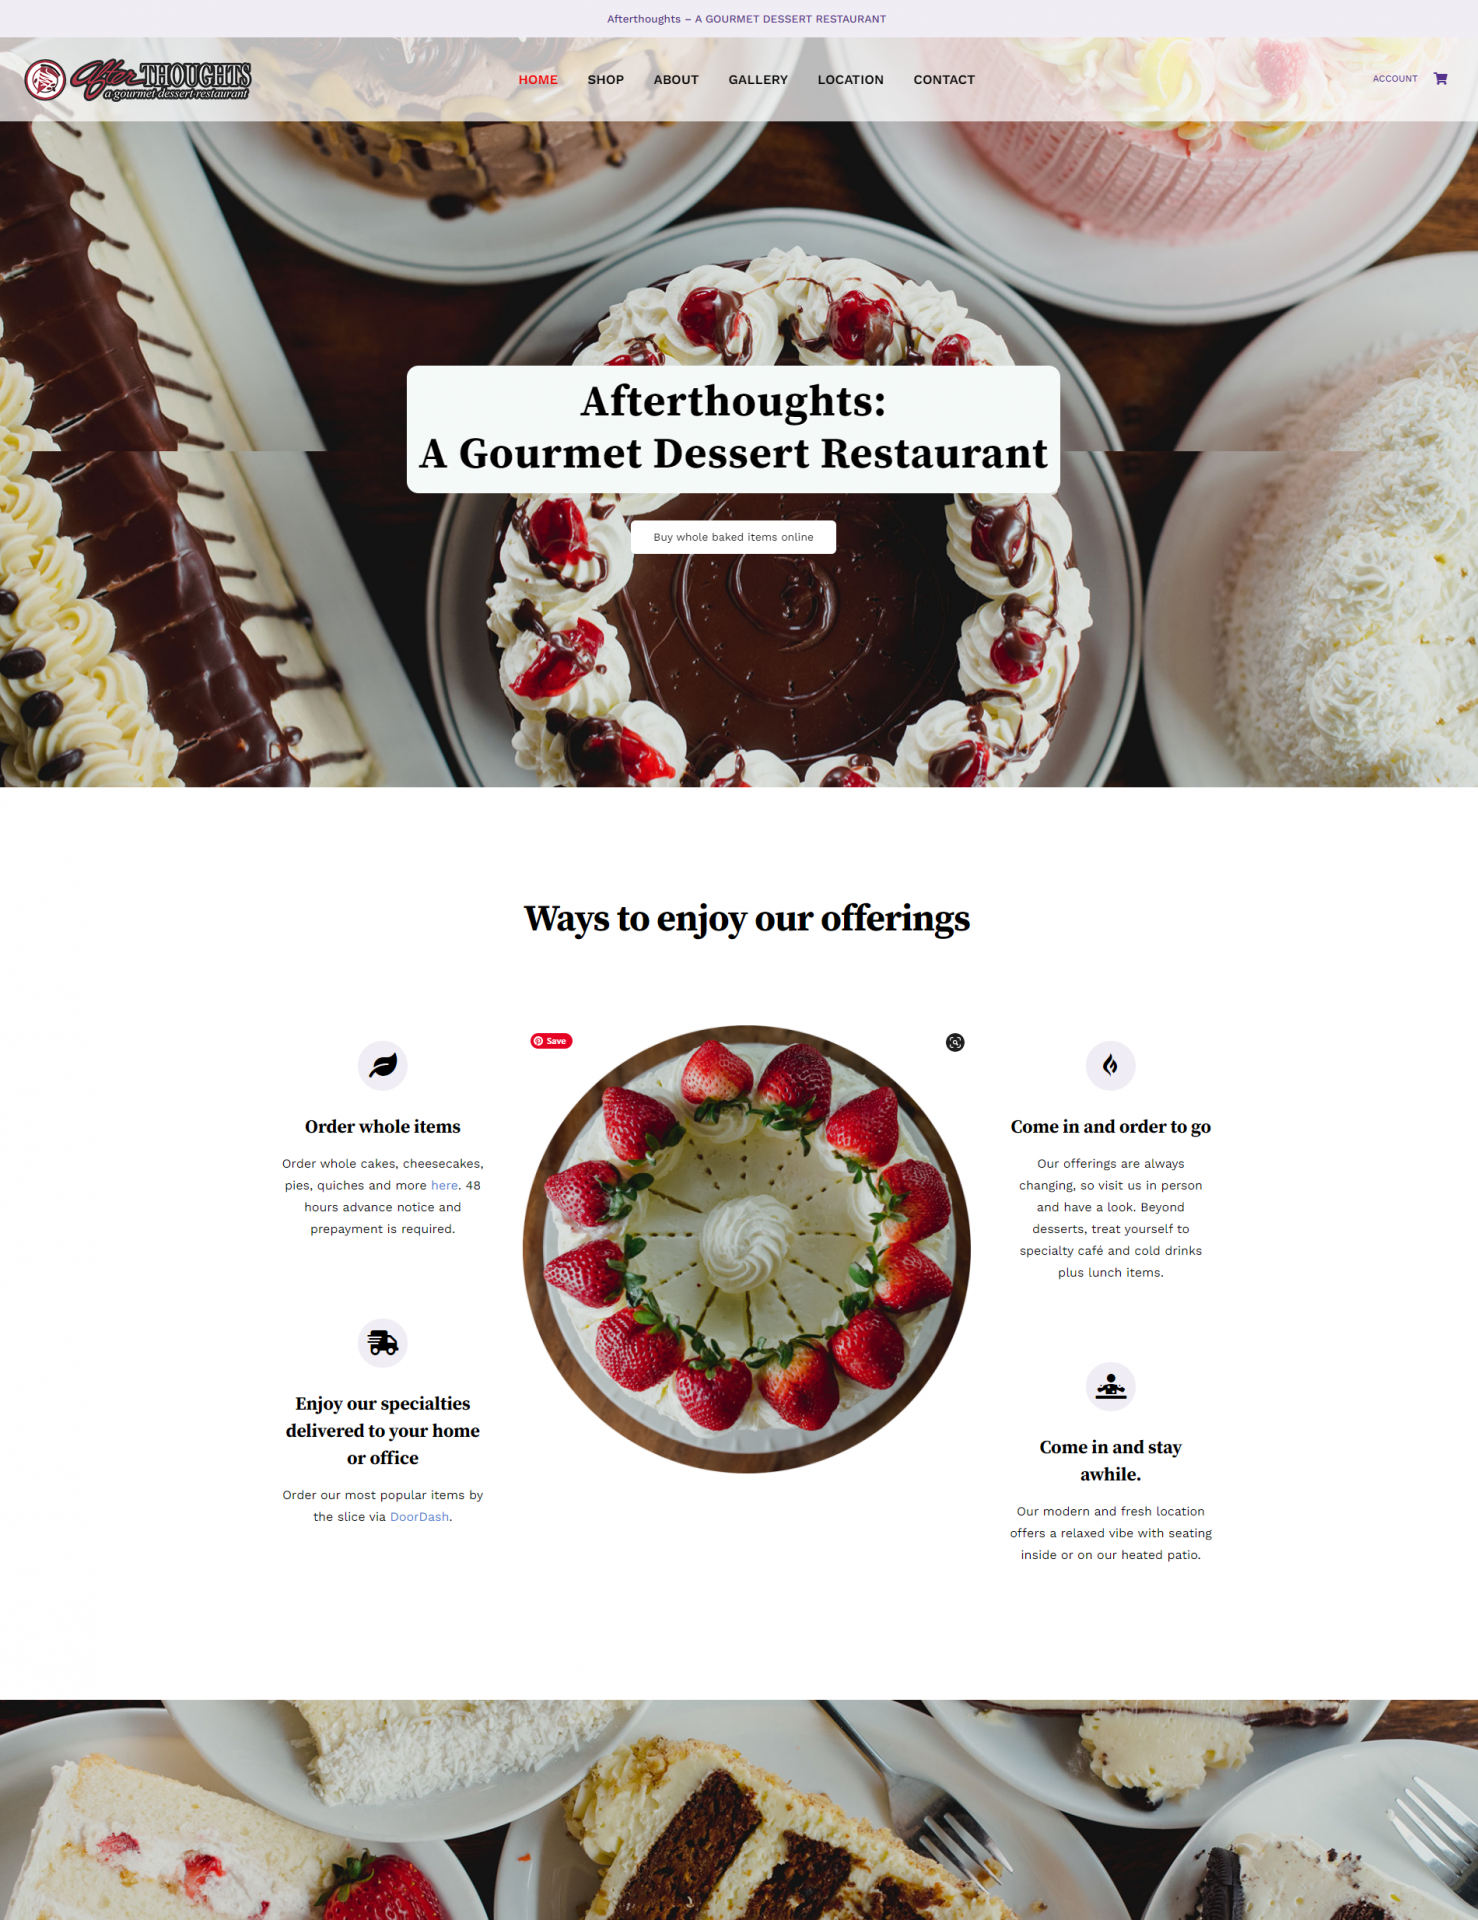 Sample page layout for Afterthoughts Dessert Restaurant.